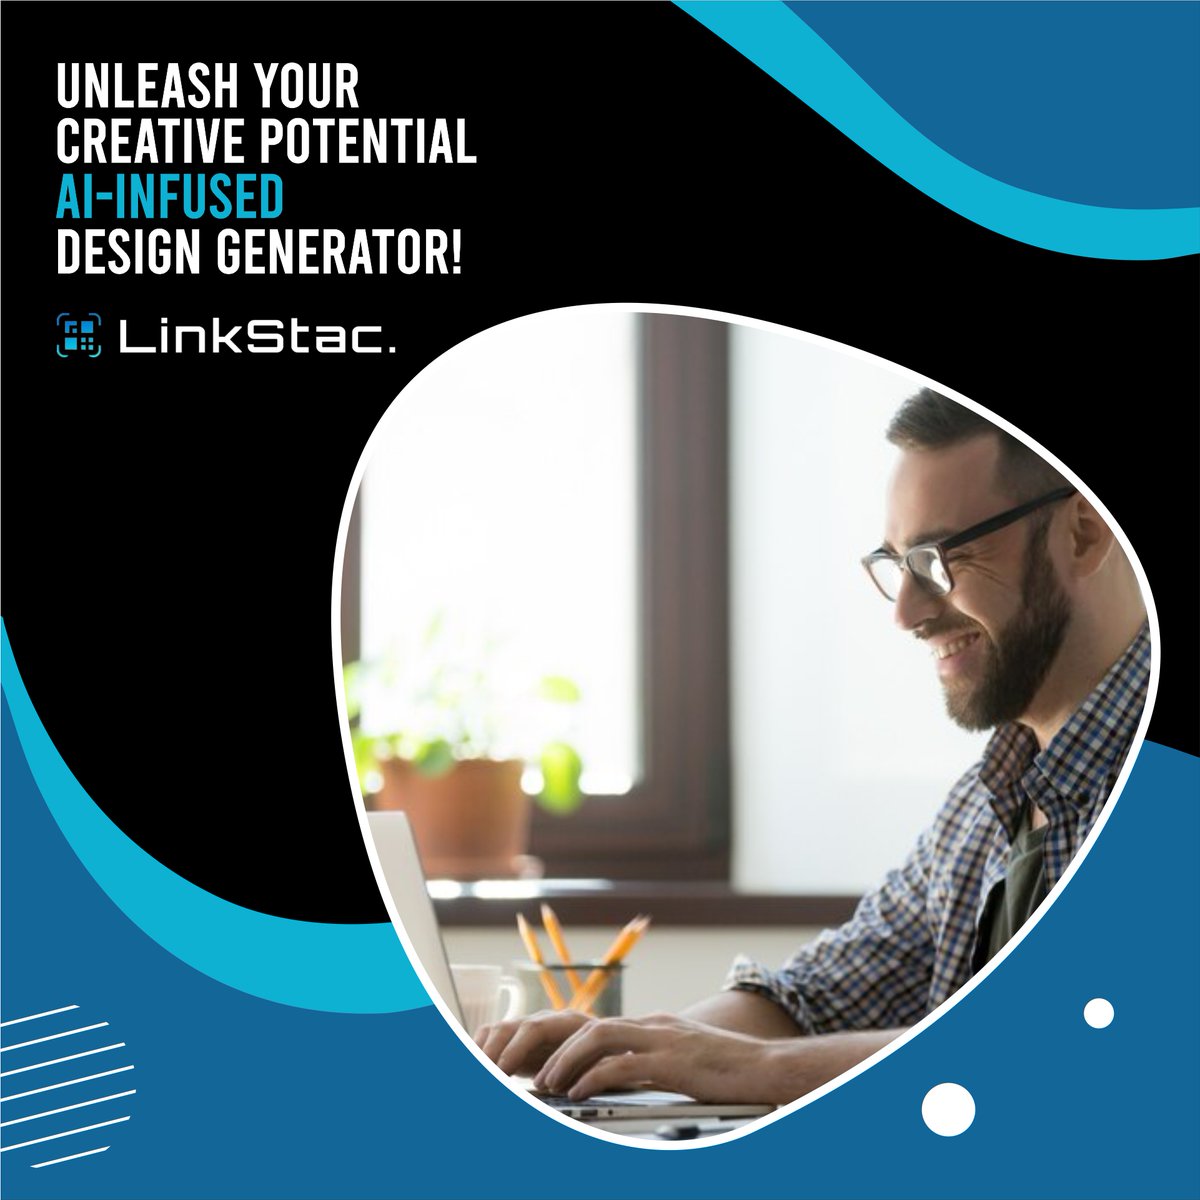 Say goodbye to generic QR codes and hello to personalized engagement! 🎨 With LinkStac's AI-infused design generator, you can effortlessly create stunning QR codes that reflect your brand identity. 

#QRcodes #PersonalizedEngagement #DesignGenerator #BrandIdentity